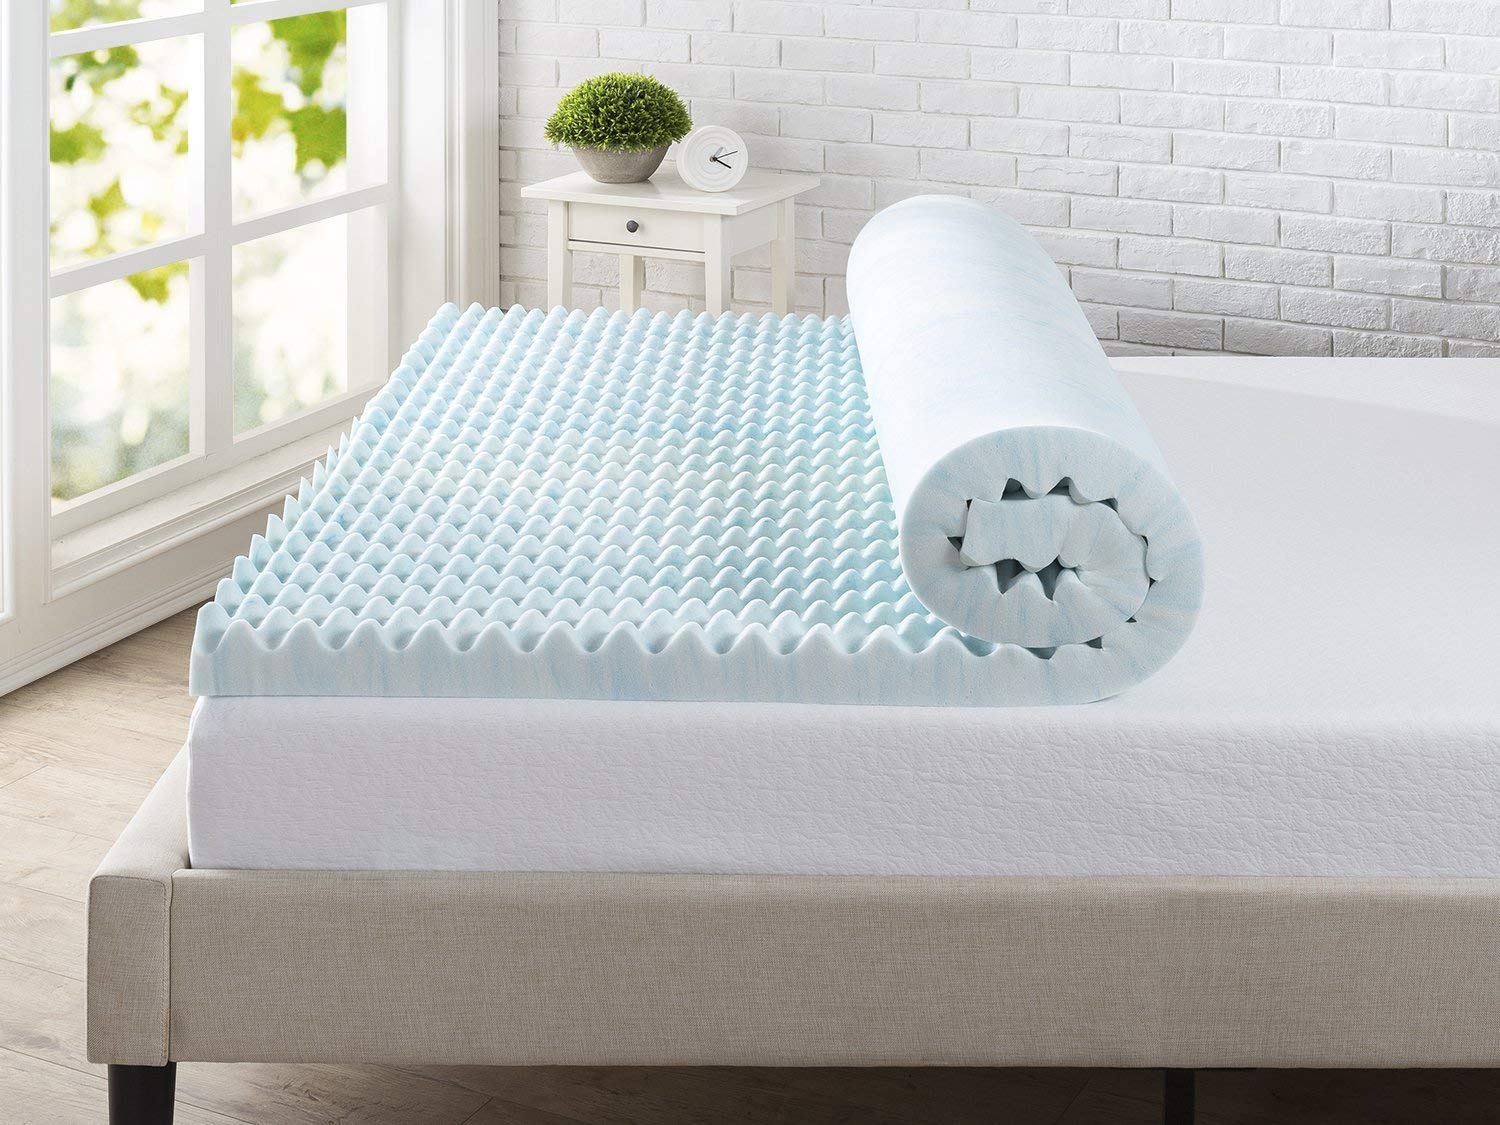 firm mattress topper for king bed